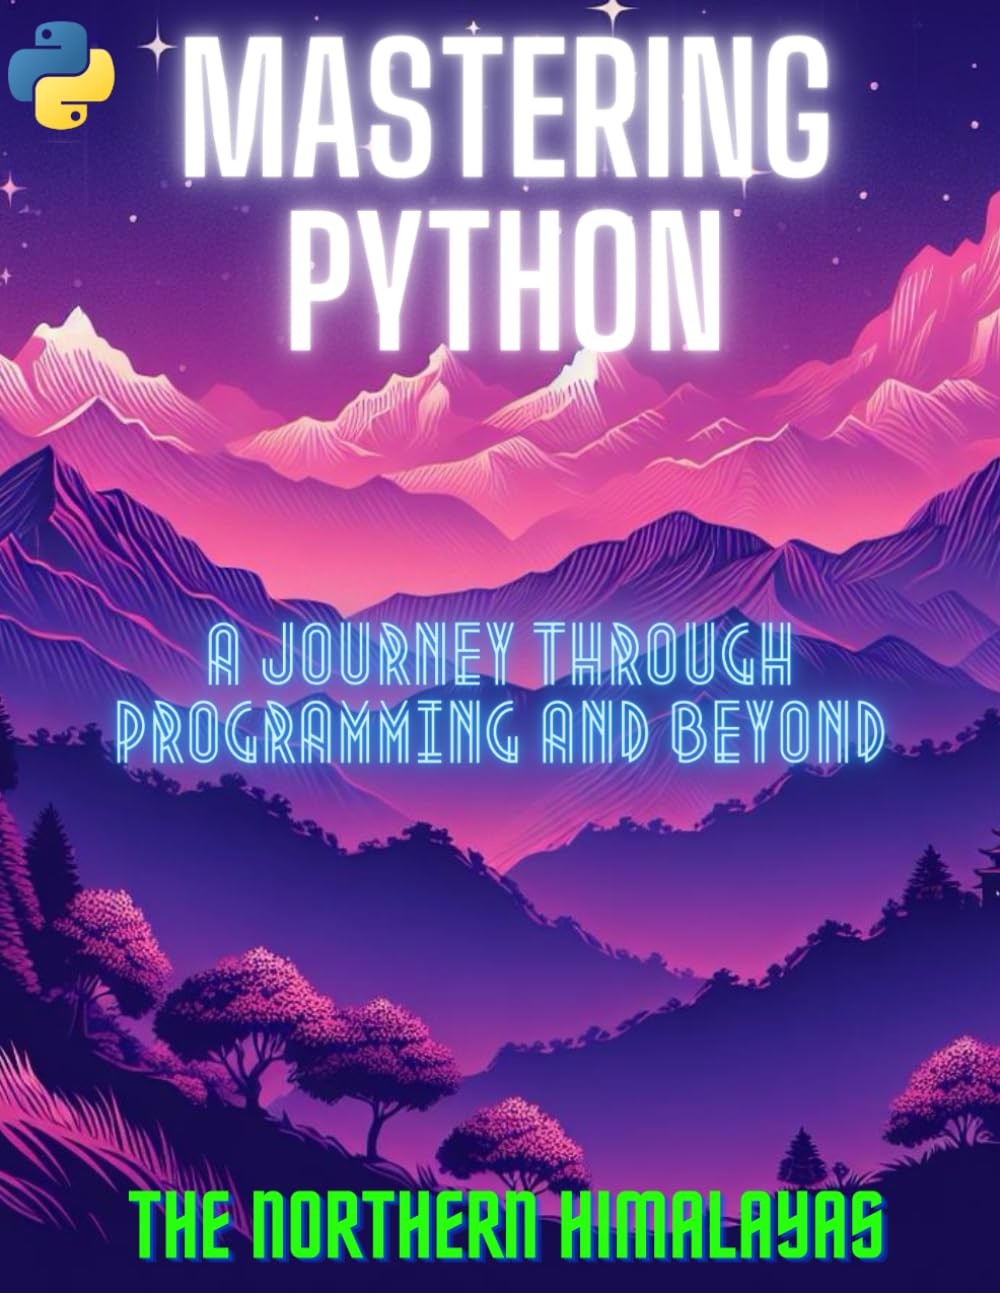 Mastering Python: A Journey Through Programming and Beyond